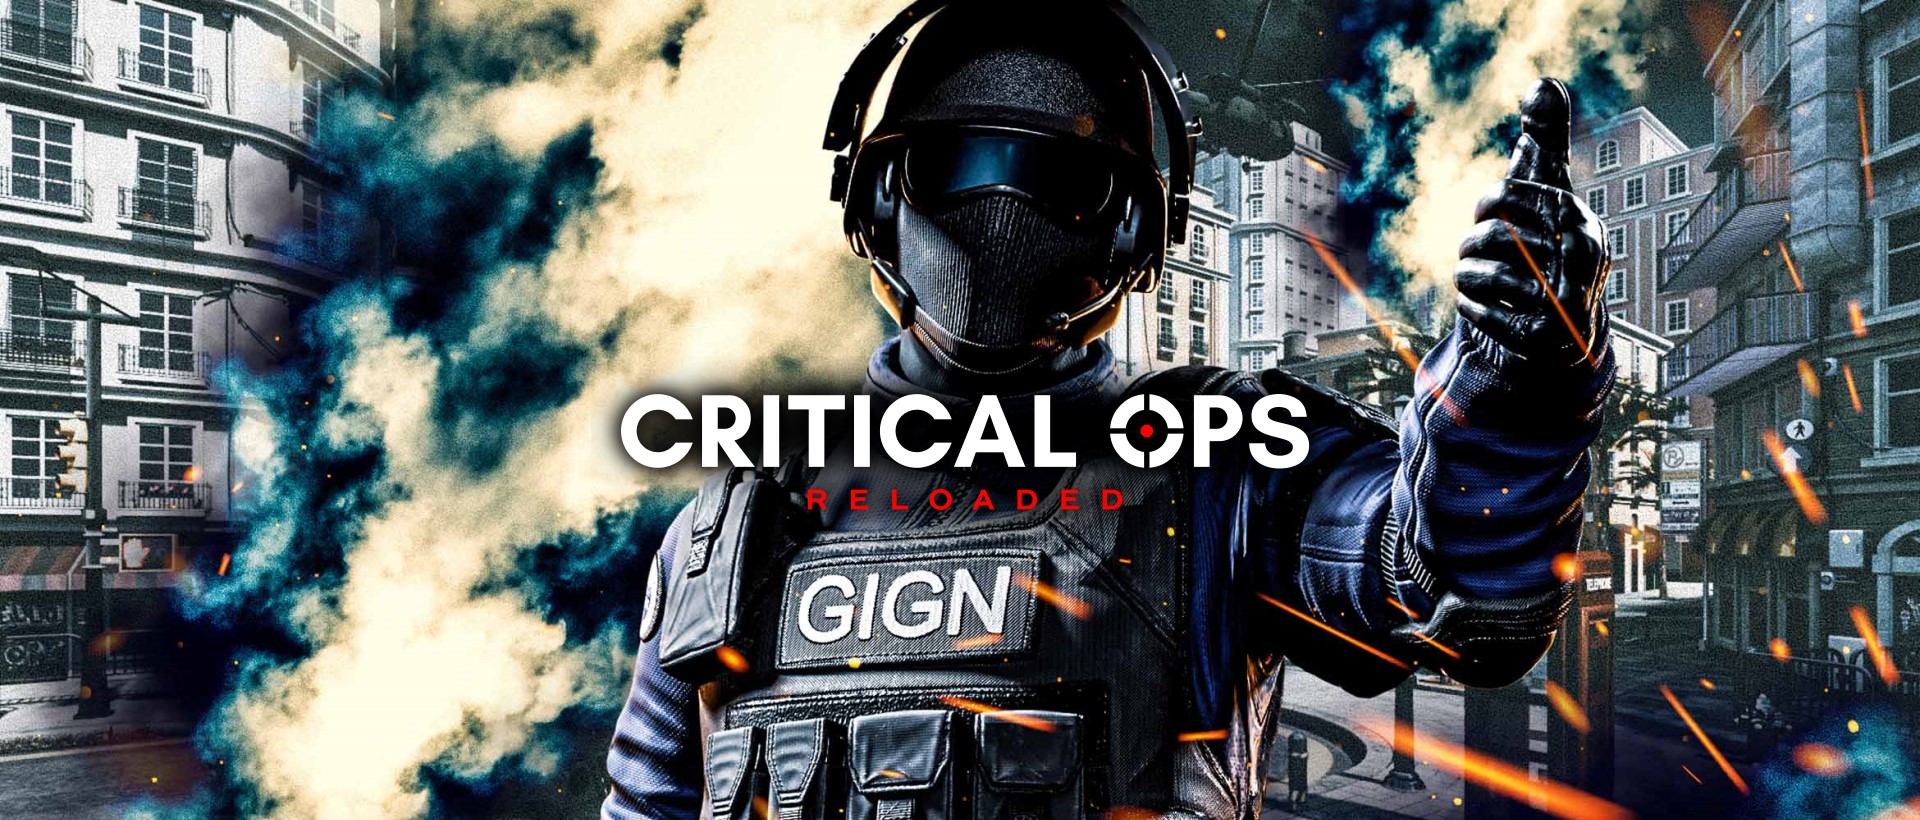 critical ops pc download softonic